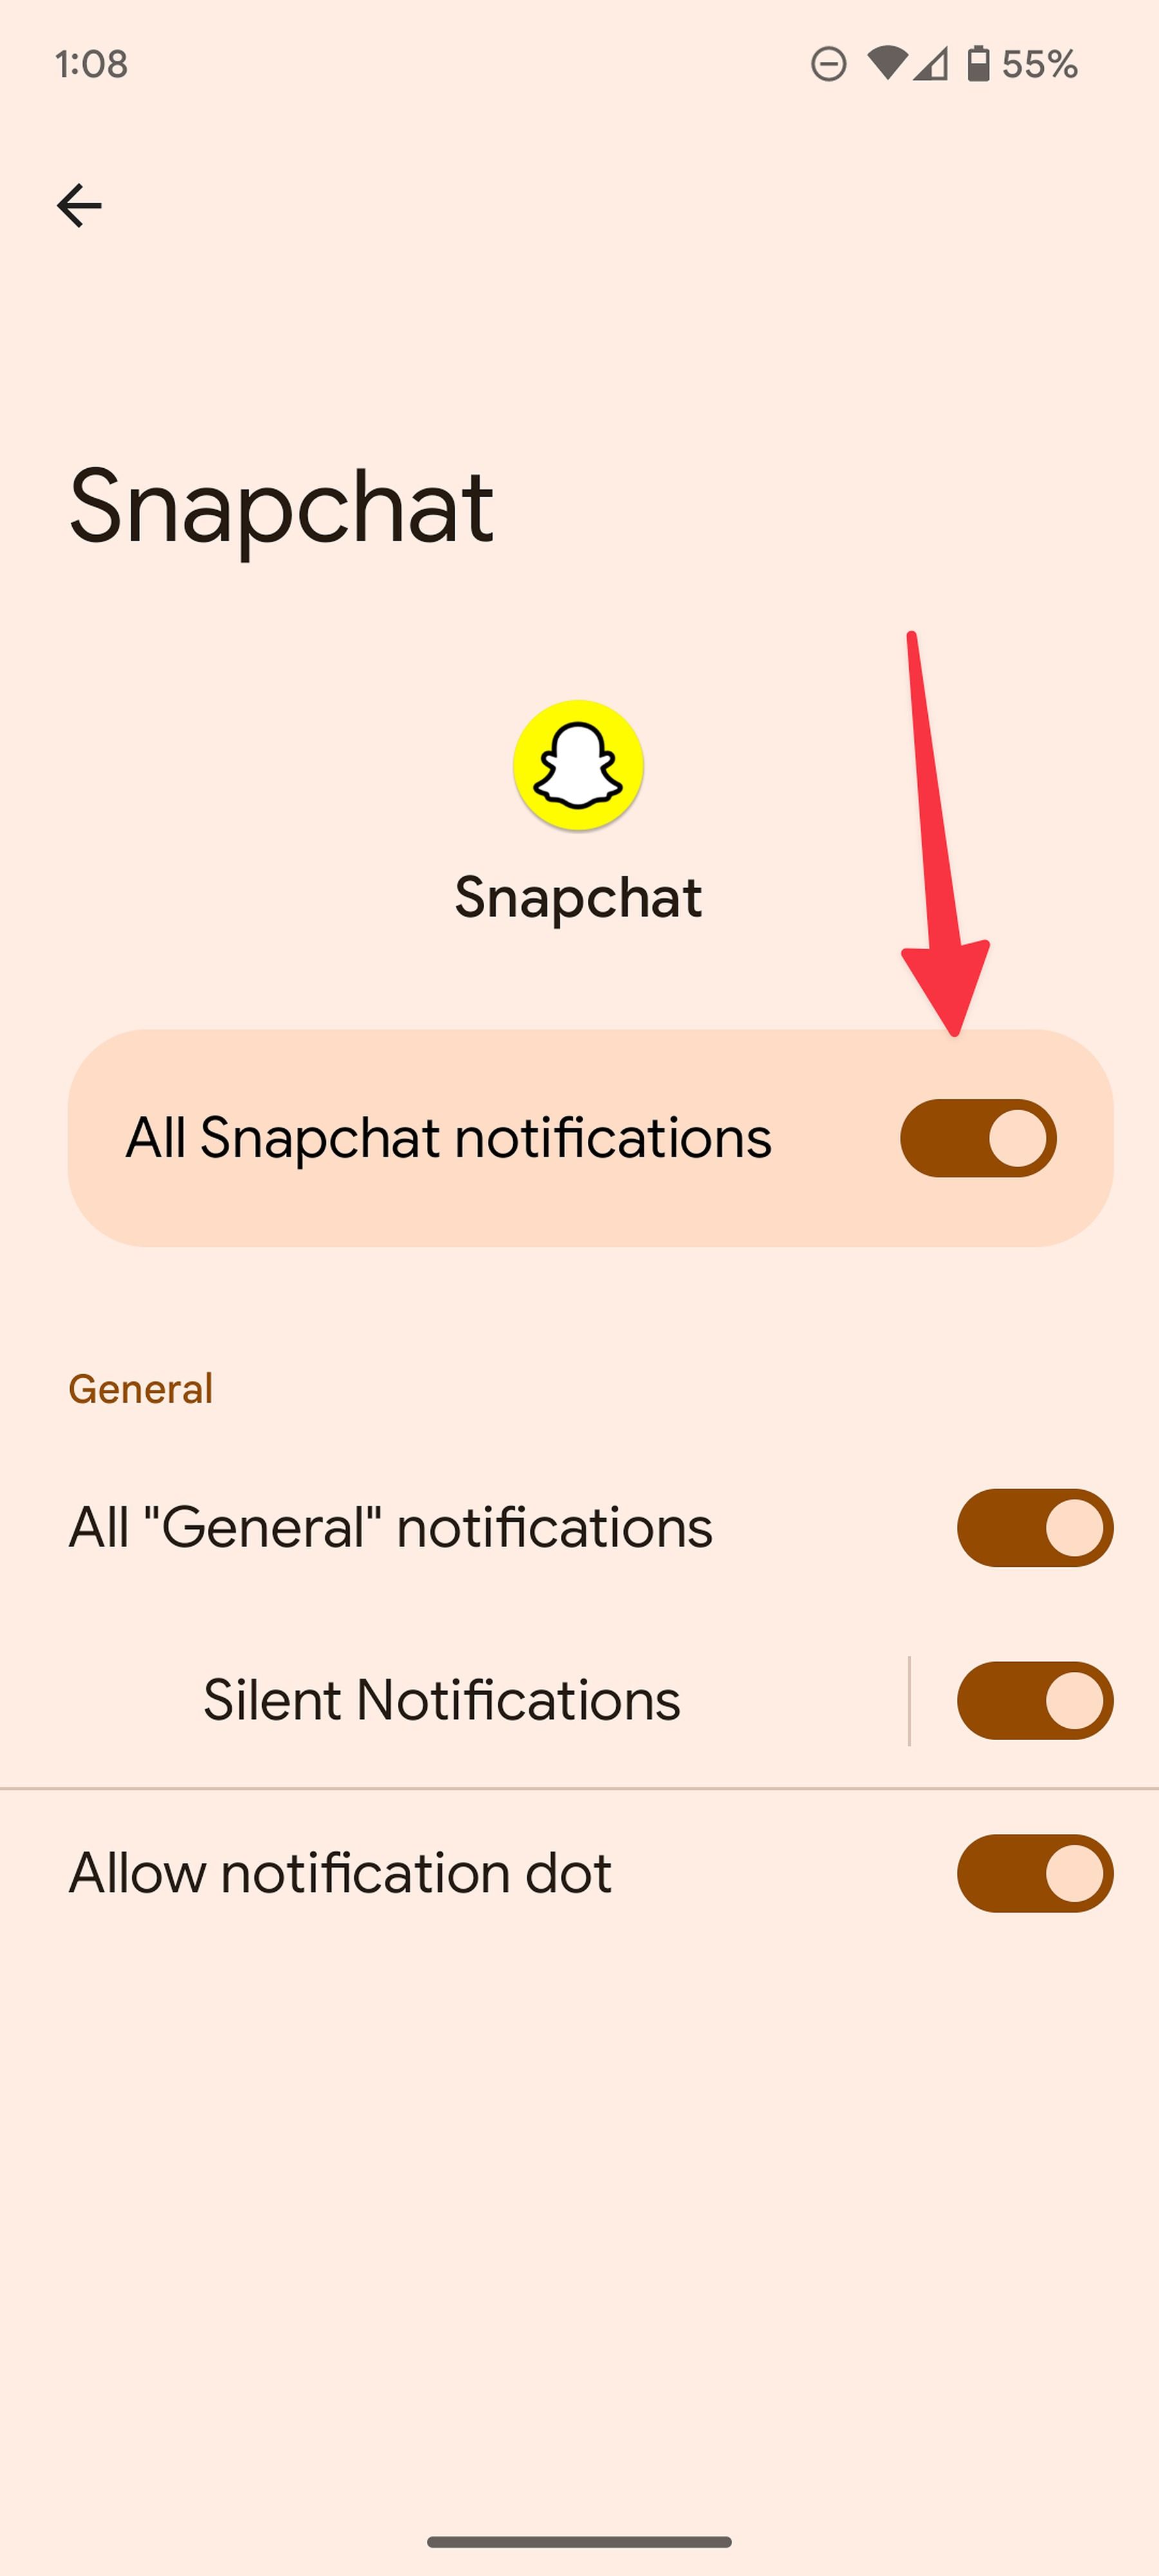 Screenshot of All Snapchat notifications toggled on